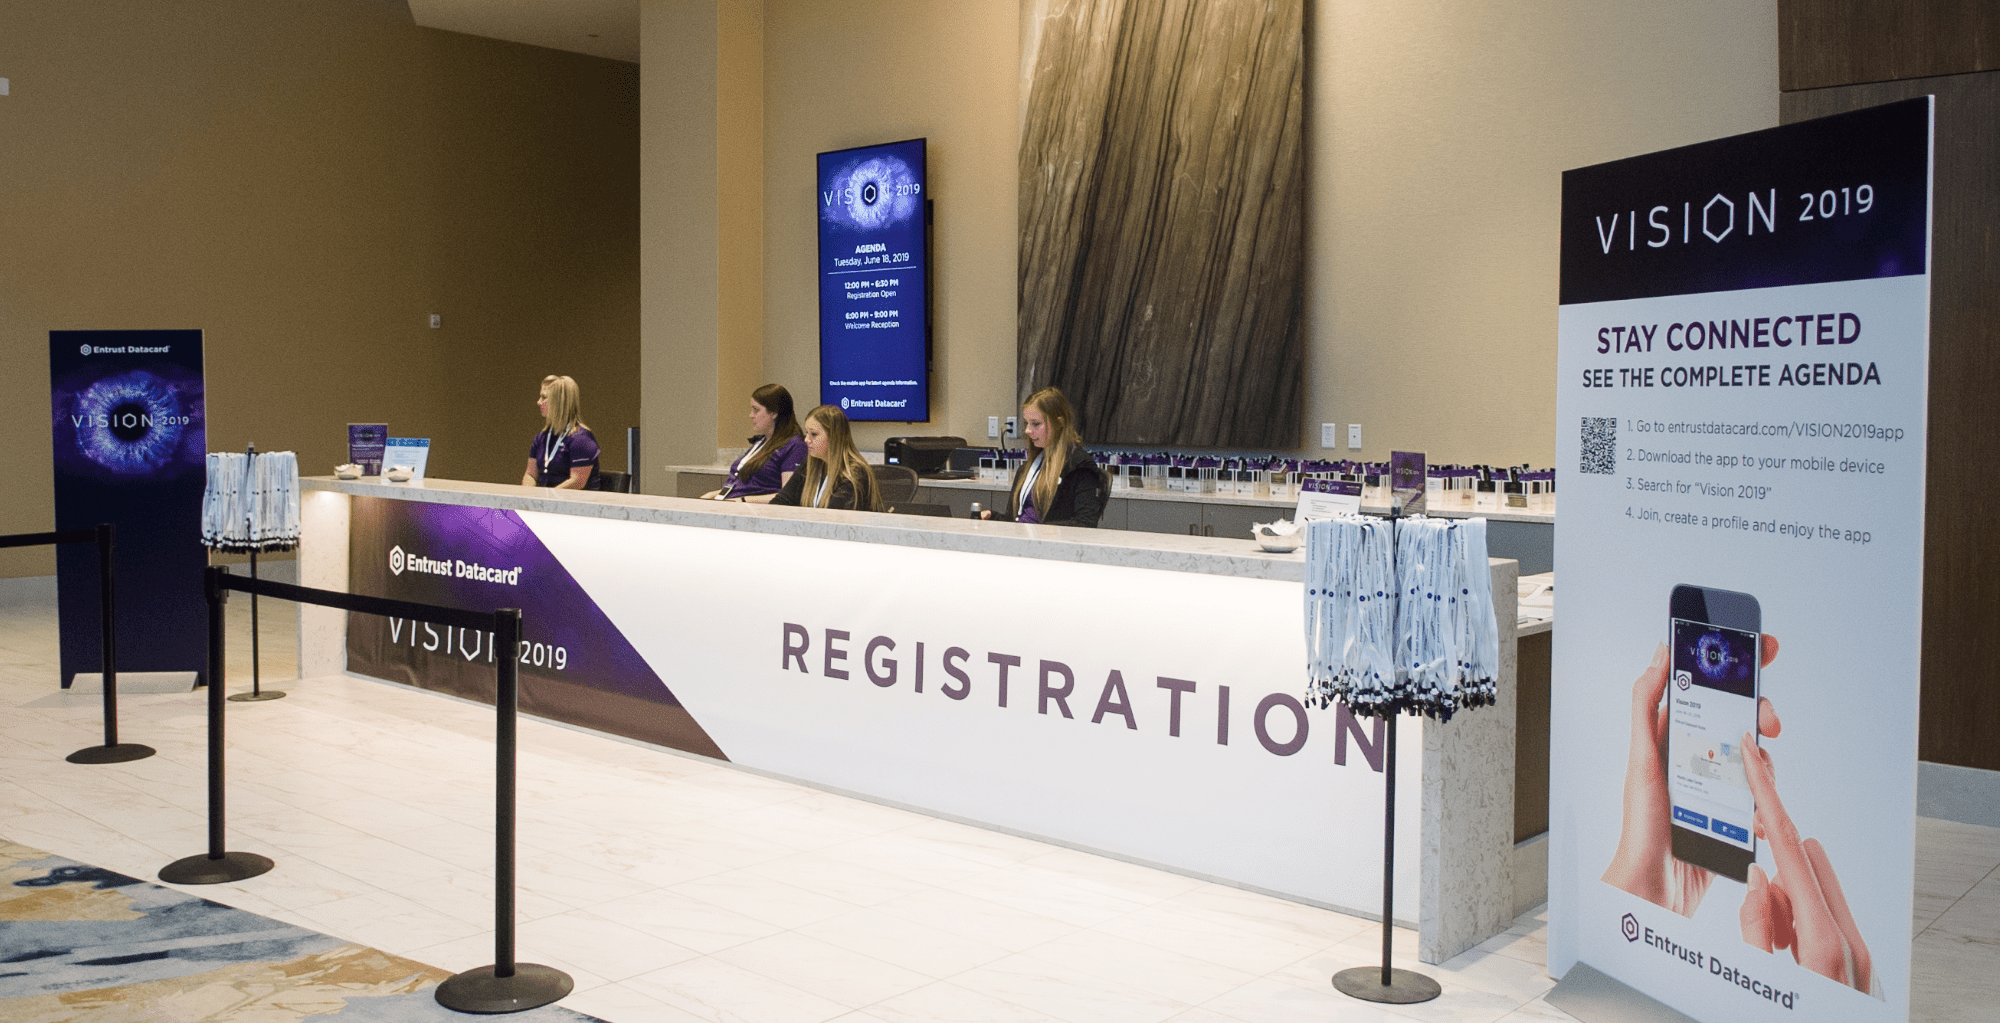 Large white and purple branded registration desk with stands holding lanyards for attendees. Custom signs explaining the event and presenting the theme of the event which is Vision 2019.